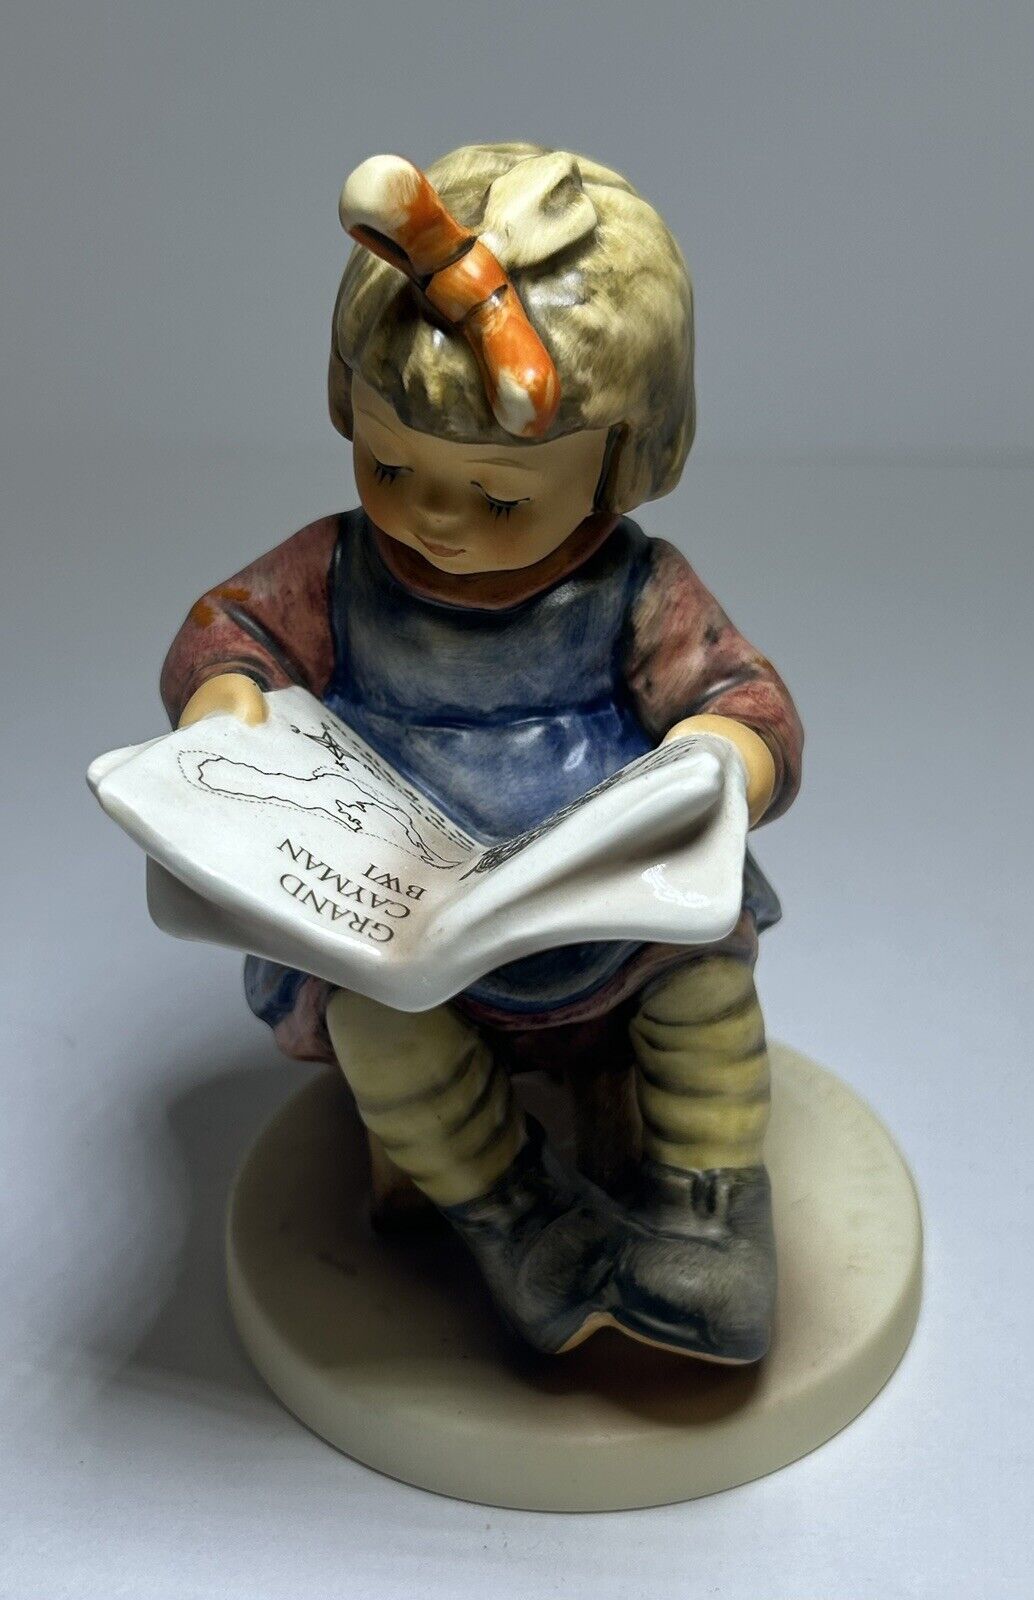 1981 Signed Hummel What's New? #418 Exclusive Grand Cayman Girl With Newsletter